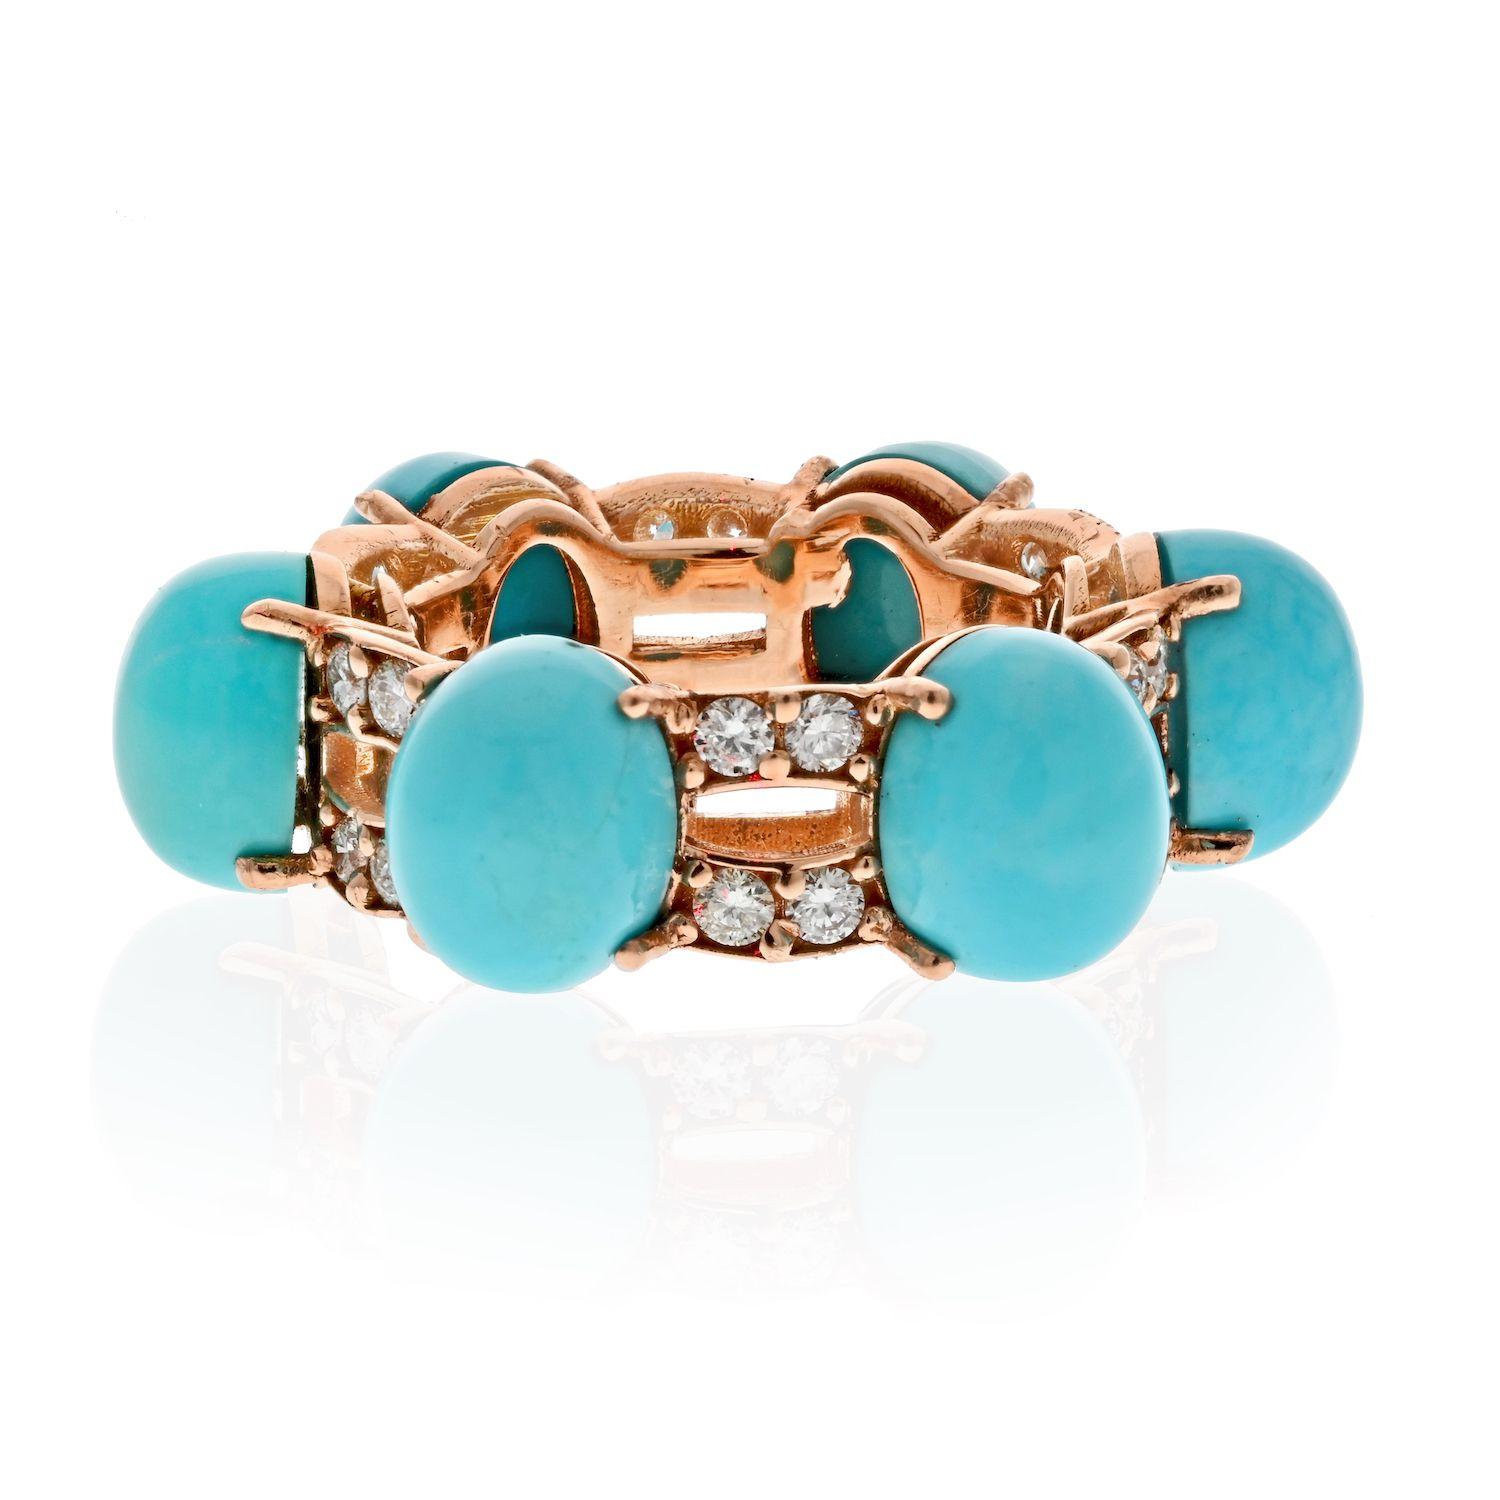 Fun estate ring with turquoise and diamonds made in 14k rose gold.
Mounted with cabochon cut turquoise stones and diamonds going full circle around. 
Ring Width: 9mm
Sits 8mm off the finger. 
Size 7